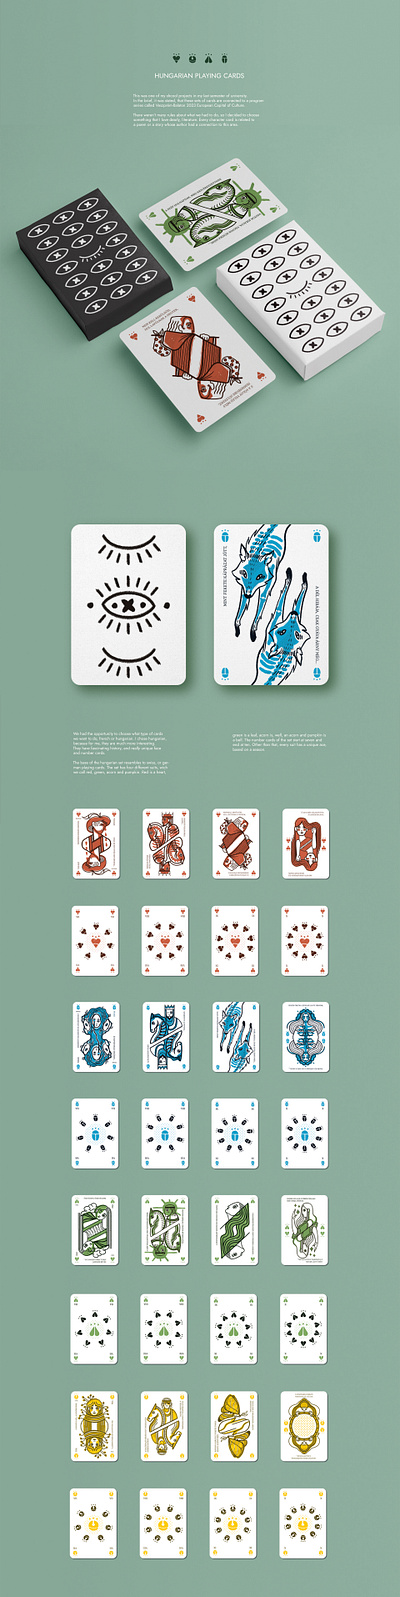 Hungarian playing card deck card design cards deck design graphic design illustration playingcards